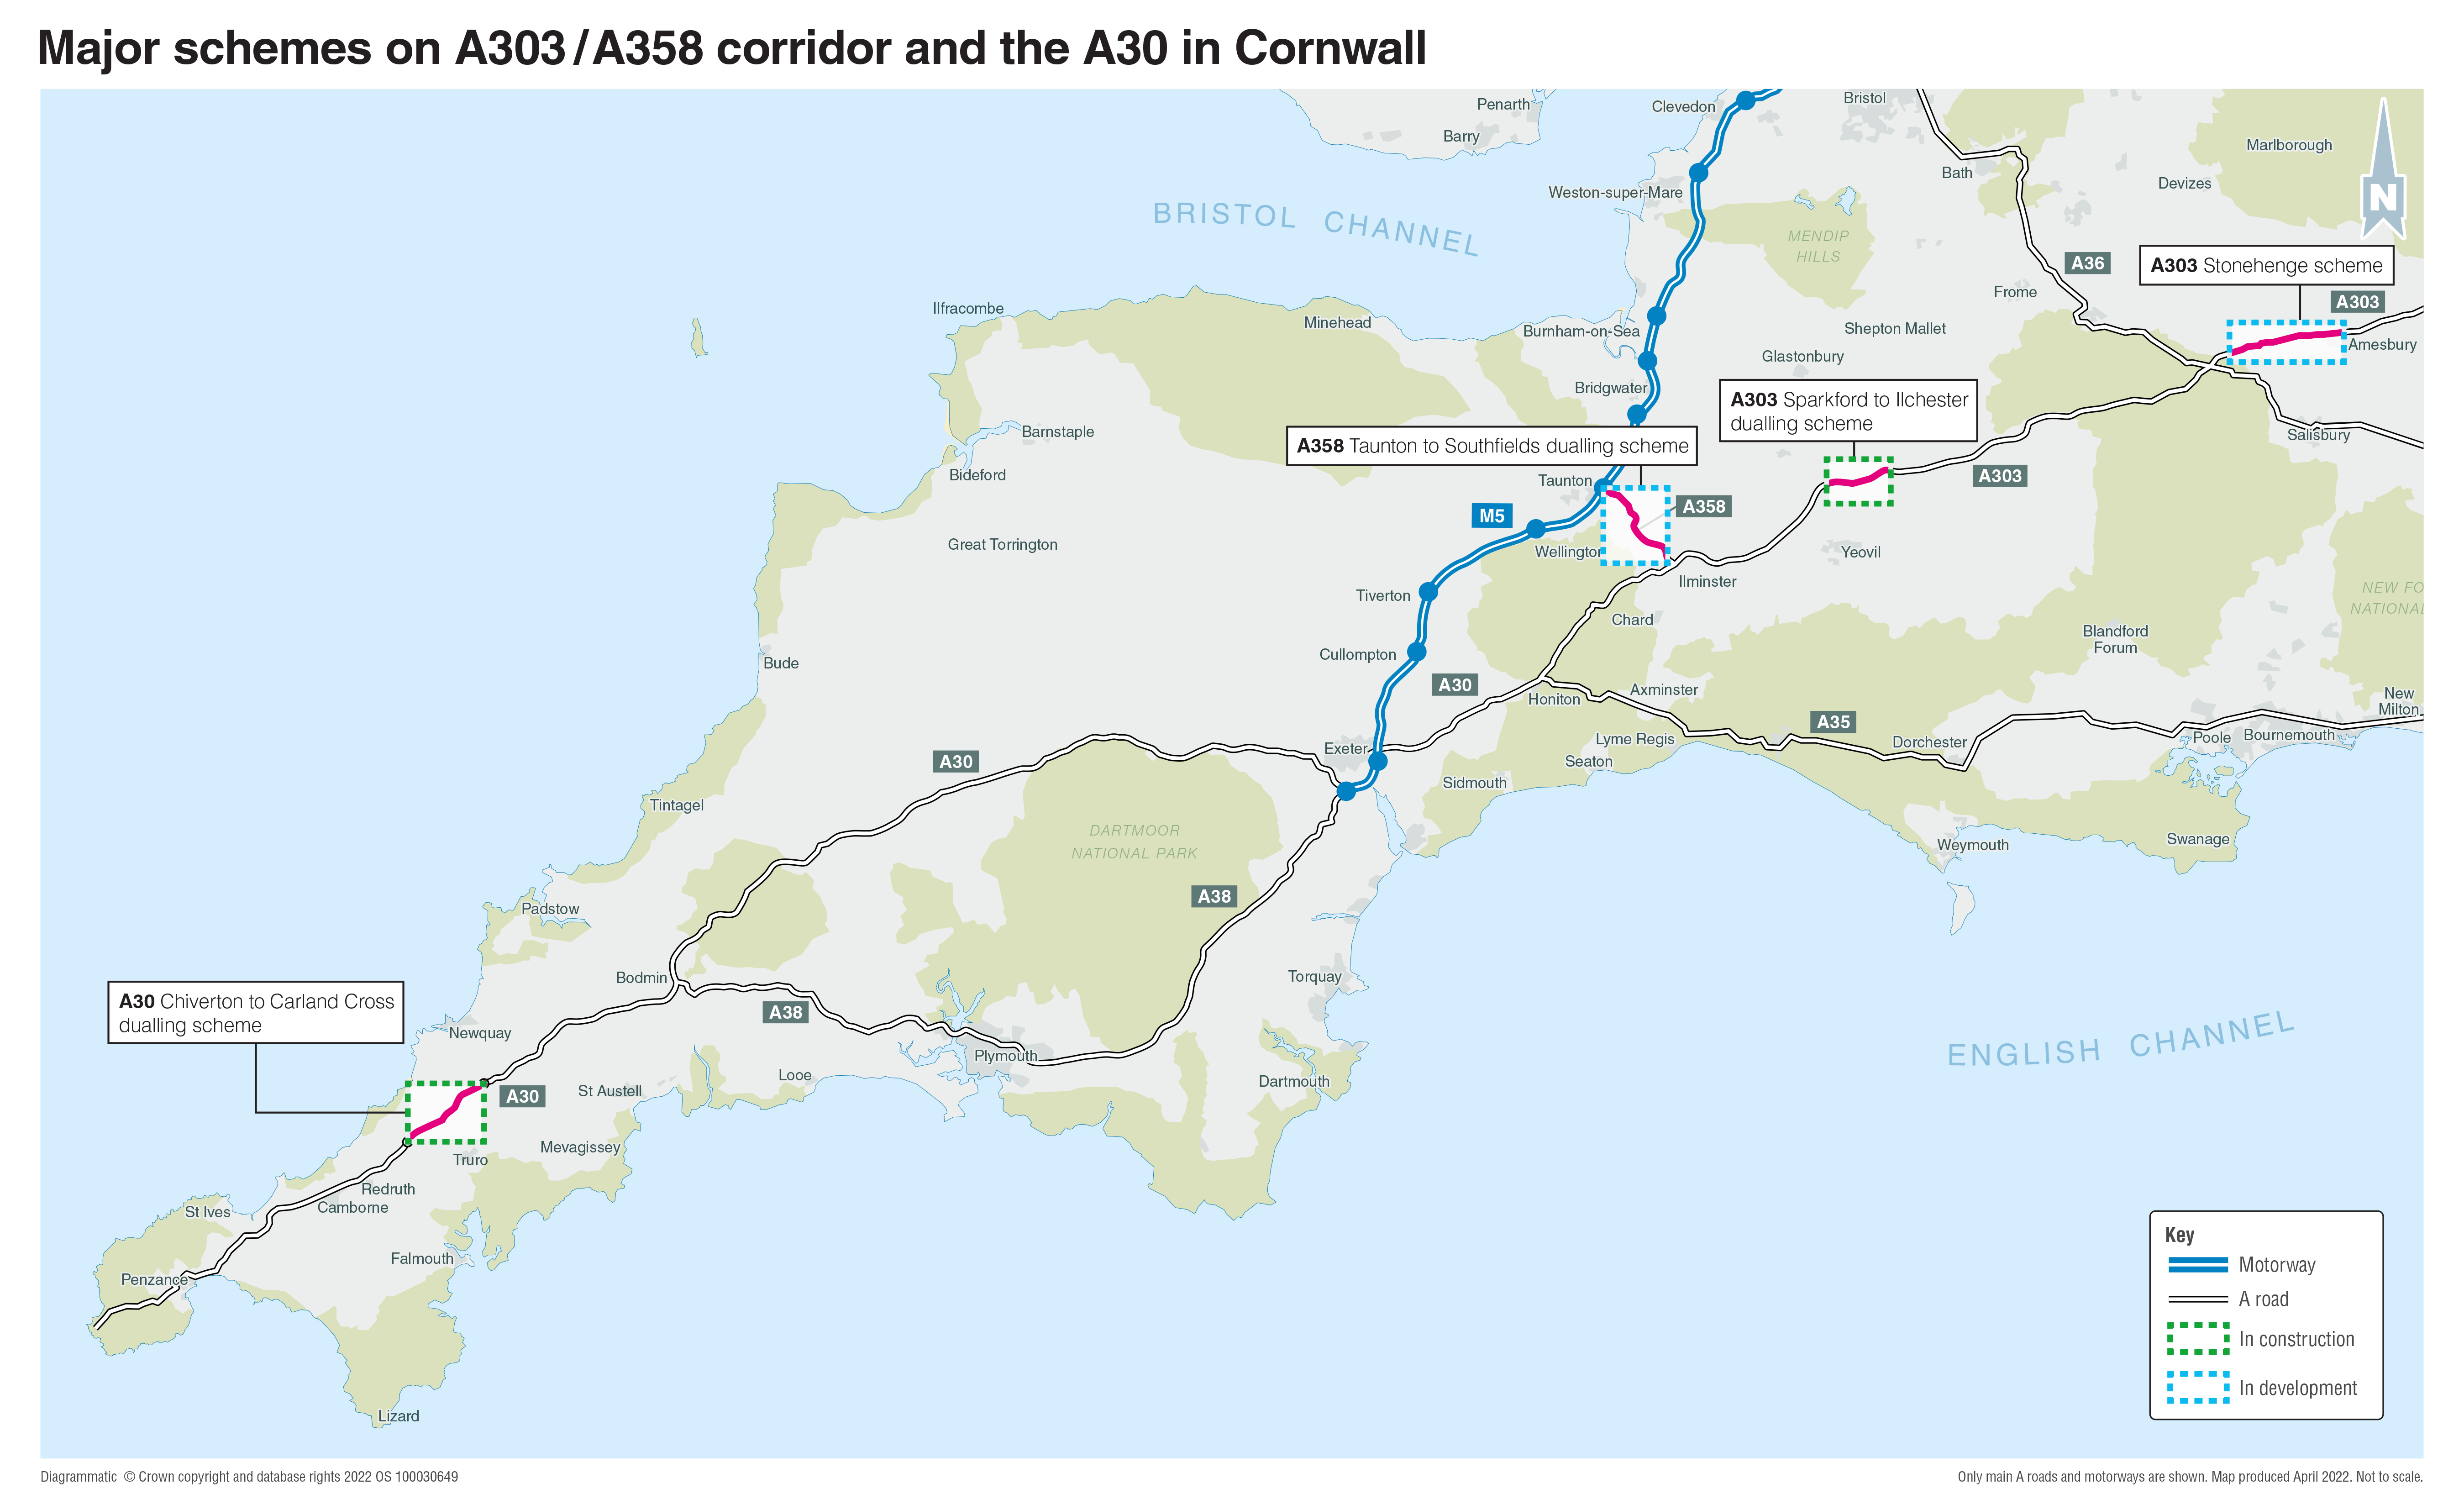 Map of major schemes along the A303/A358 corridor and the A30 in Cornwall